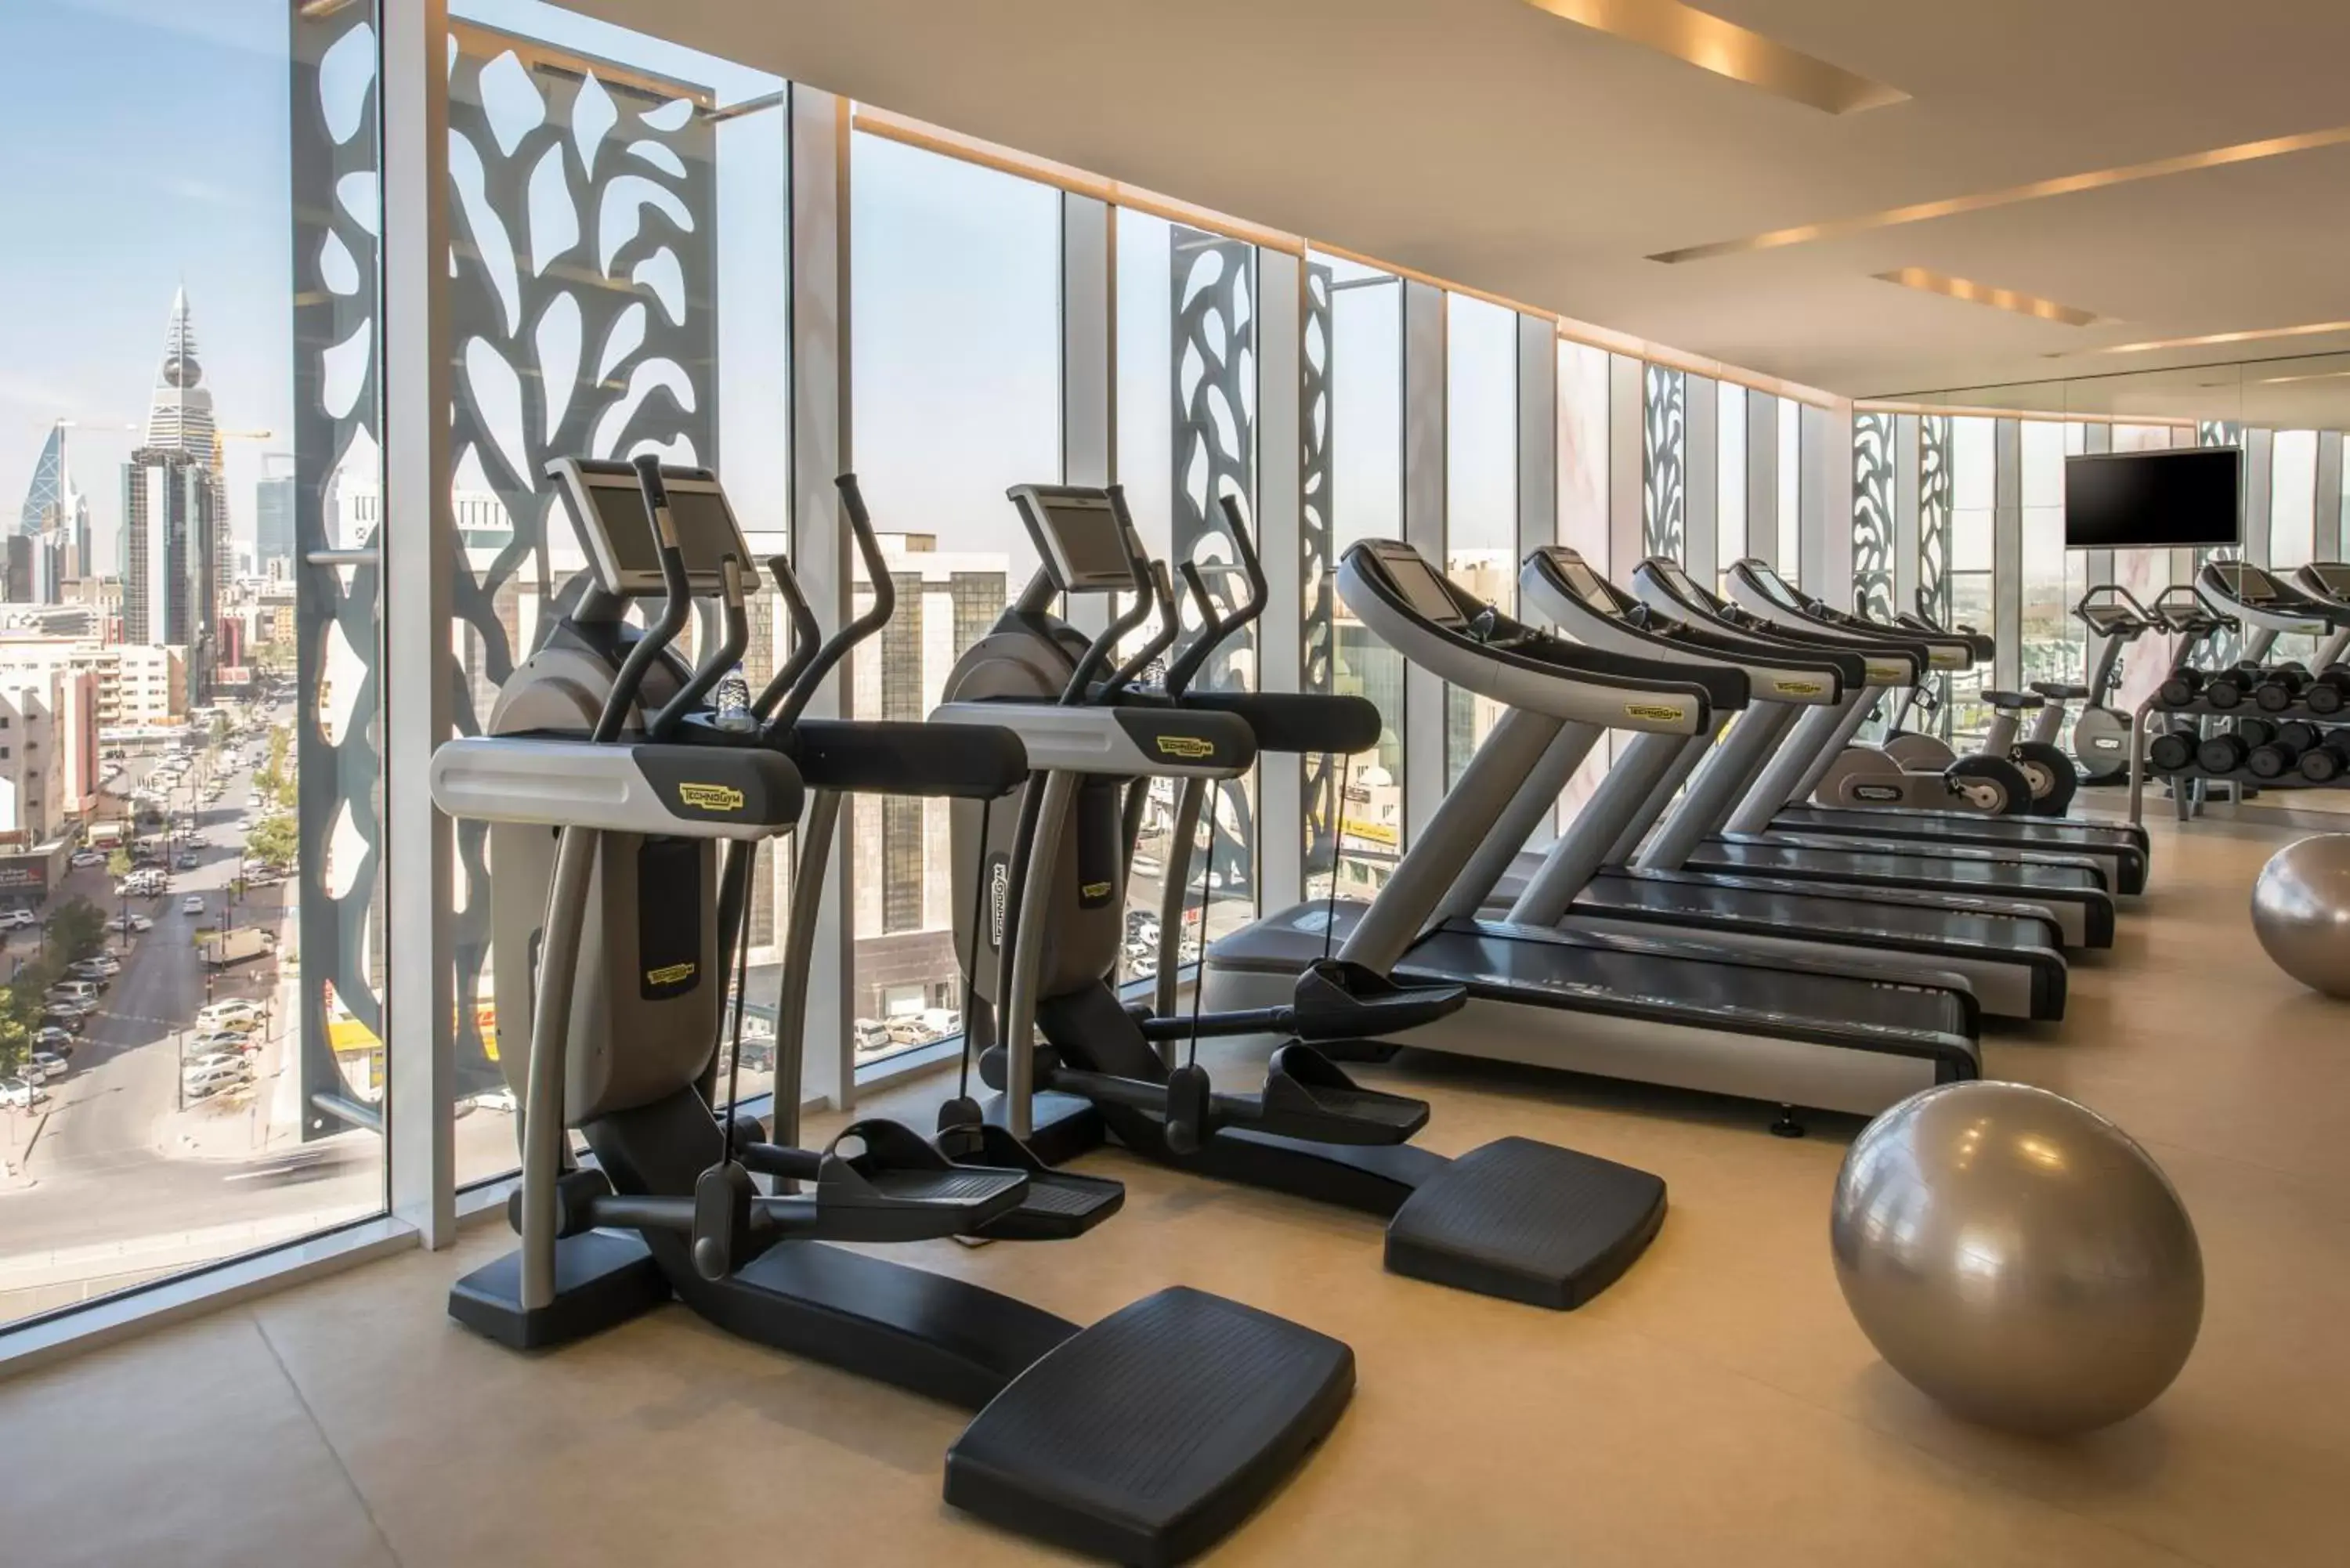 Fitness centre/facilities, Fitness Center/Facilities in Fraser Suites Riyadh